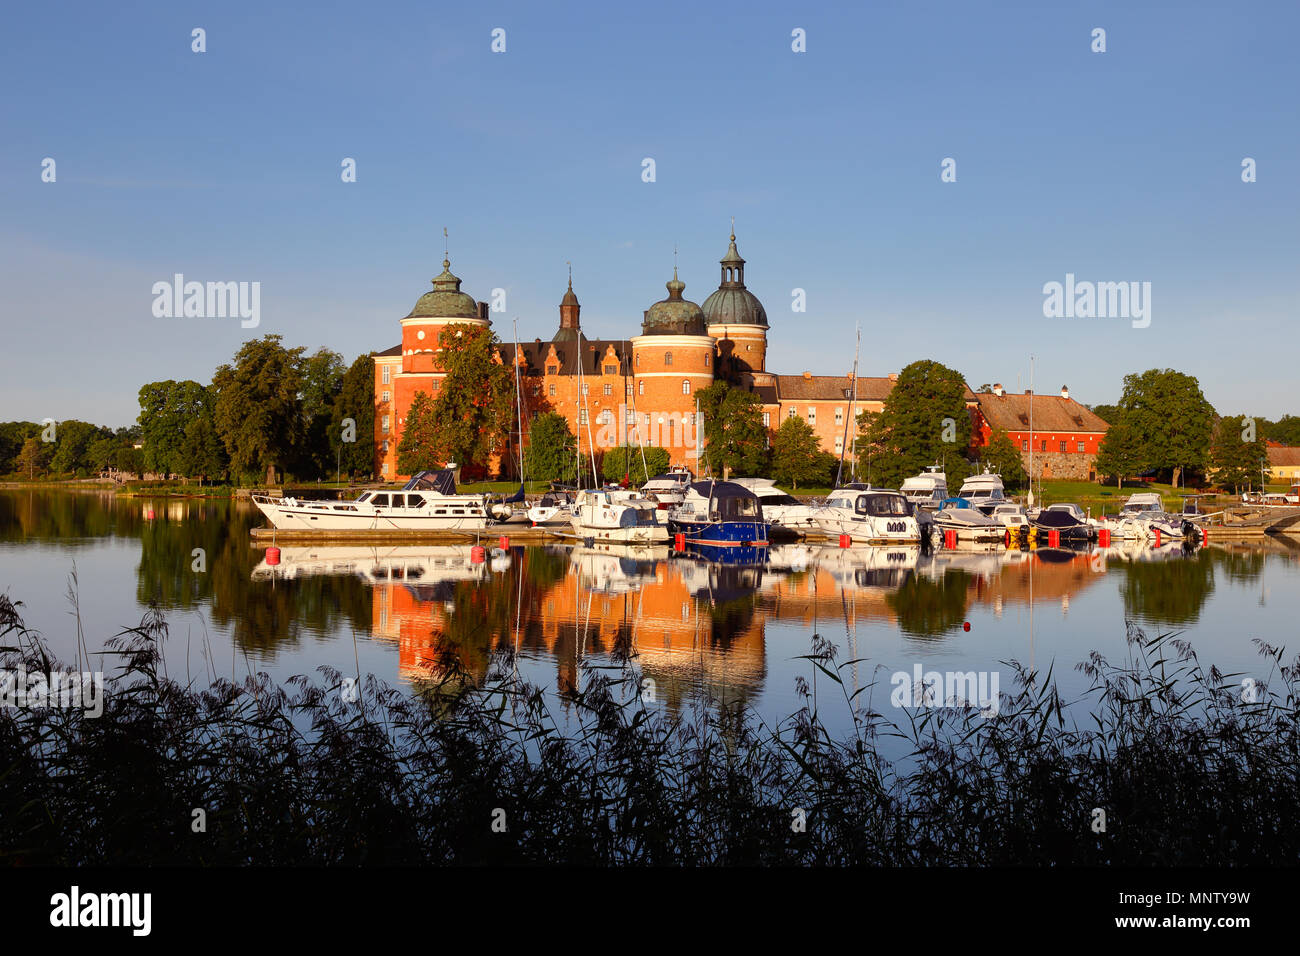 Mariefred, Sweden - August 15, 2017: Morning light with recreational boats in front of the royal Gripsholm Castle, built in the 16th century, is a tou Stock Photo